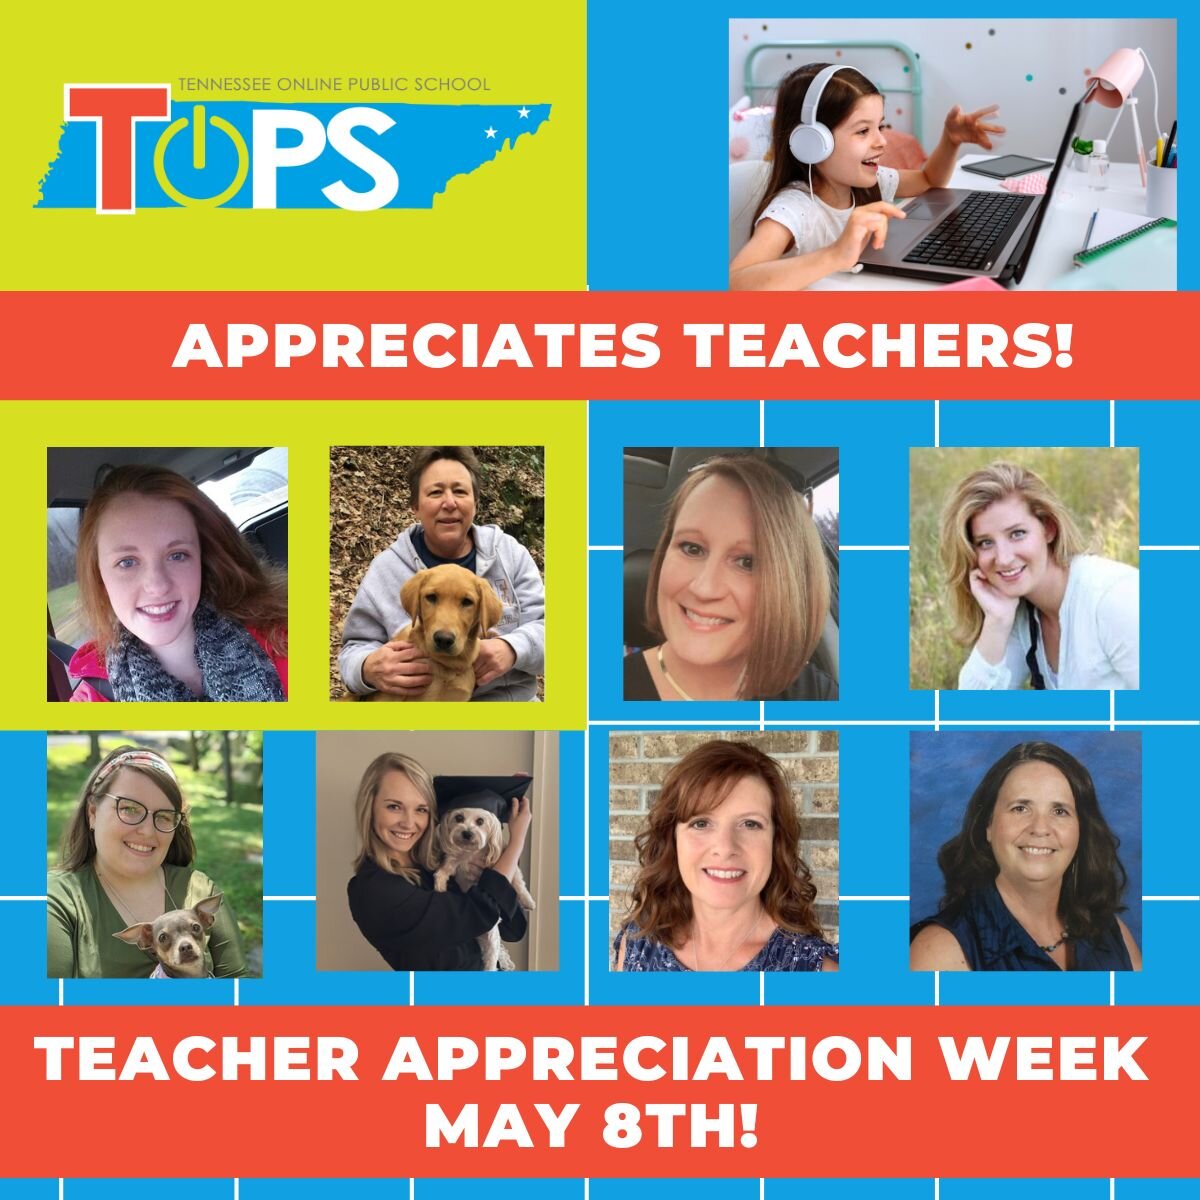 Happy Teacher Appreciation Week! Thank you to our incredible teachers at TOPS for your dedication and hard work. Your passion for education and commitment to your students is truly inspiring. We are grateful for the meaningful impact you make in the 